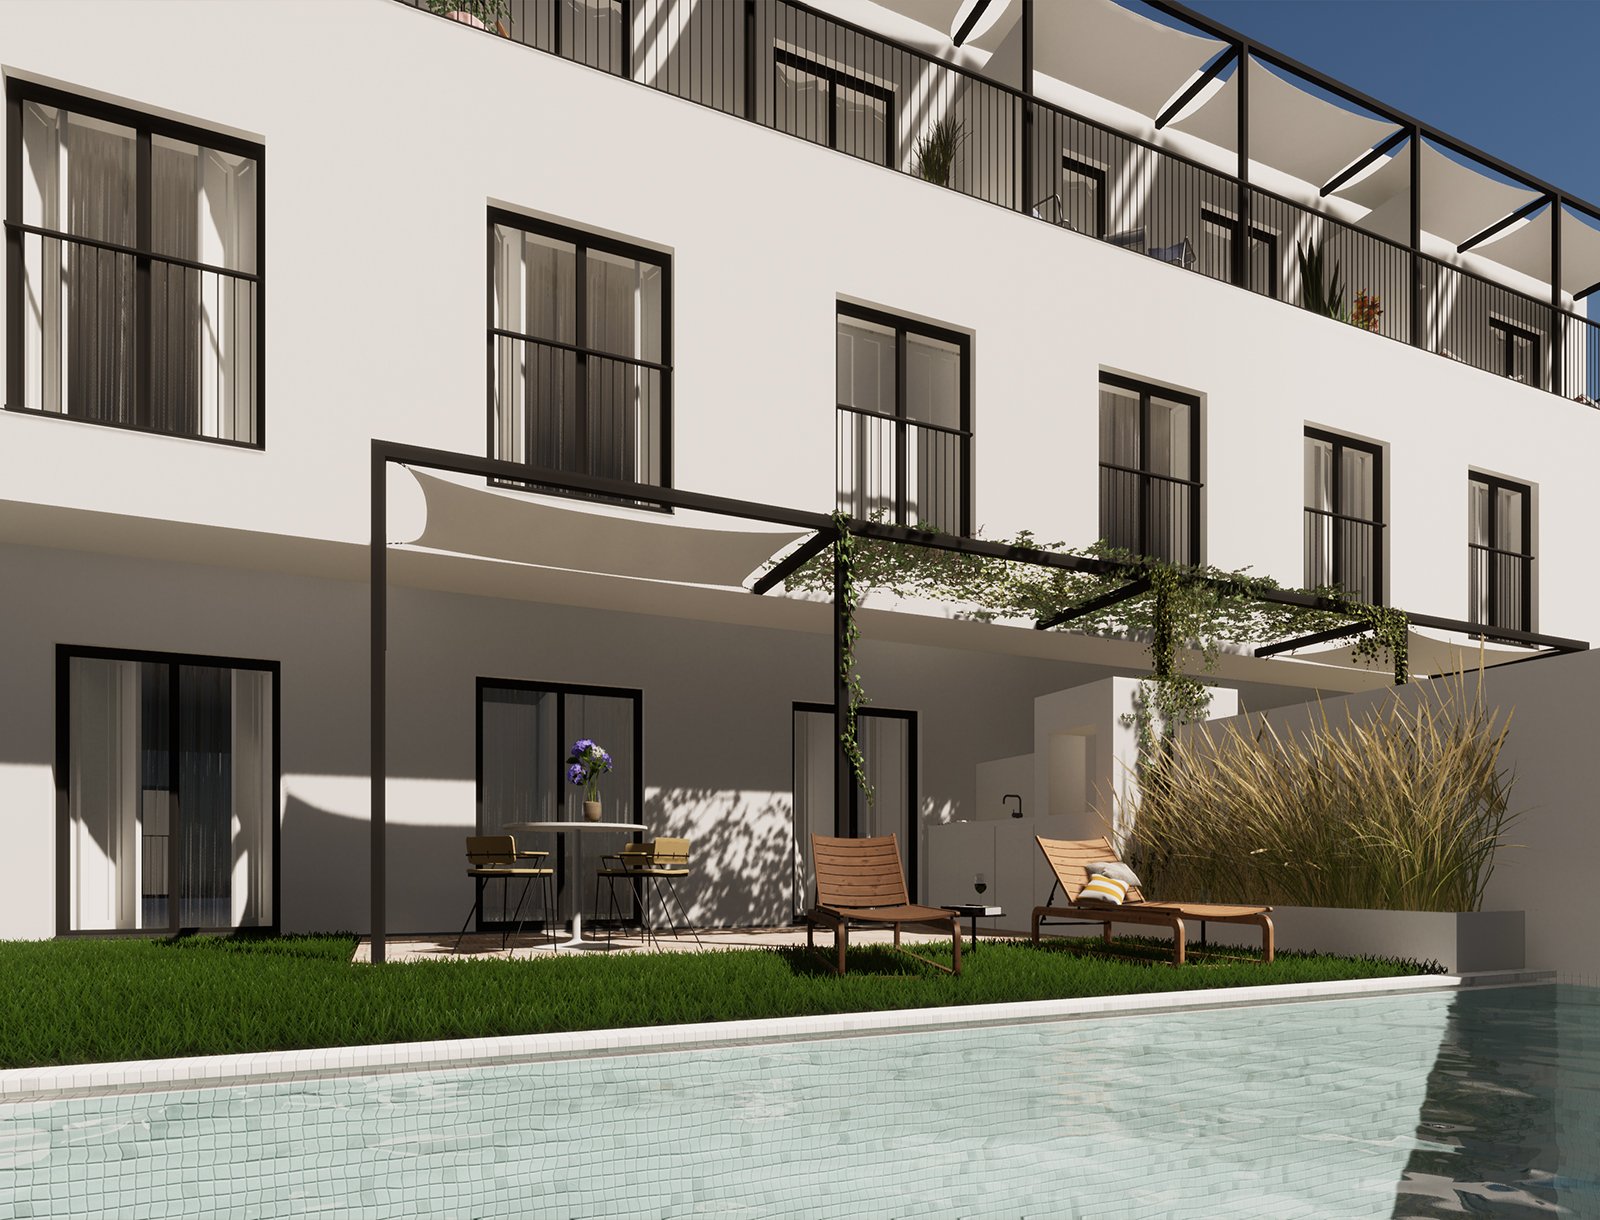 Penthouse 3 bedroom duplex apartment with balcony in new development in Tavira 1543992216